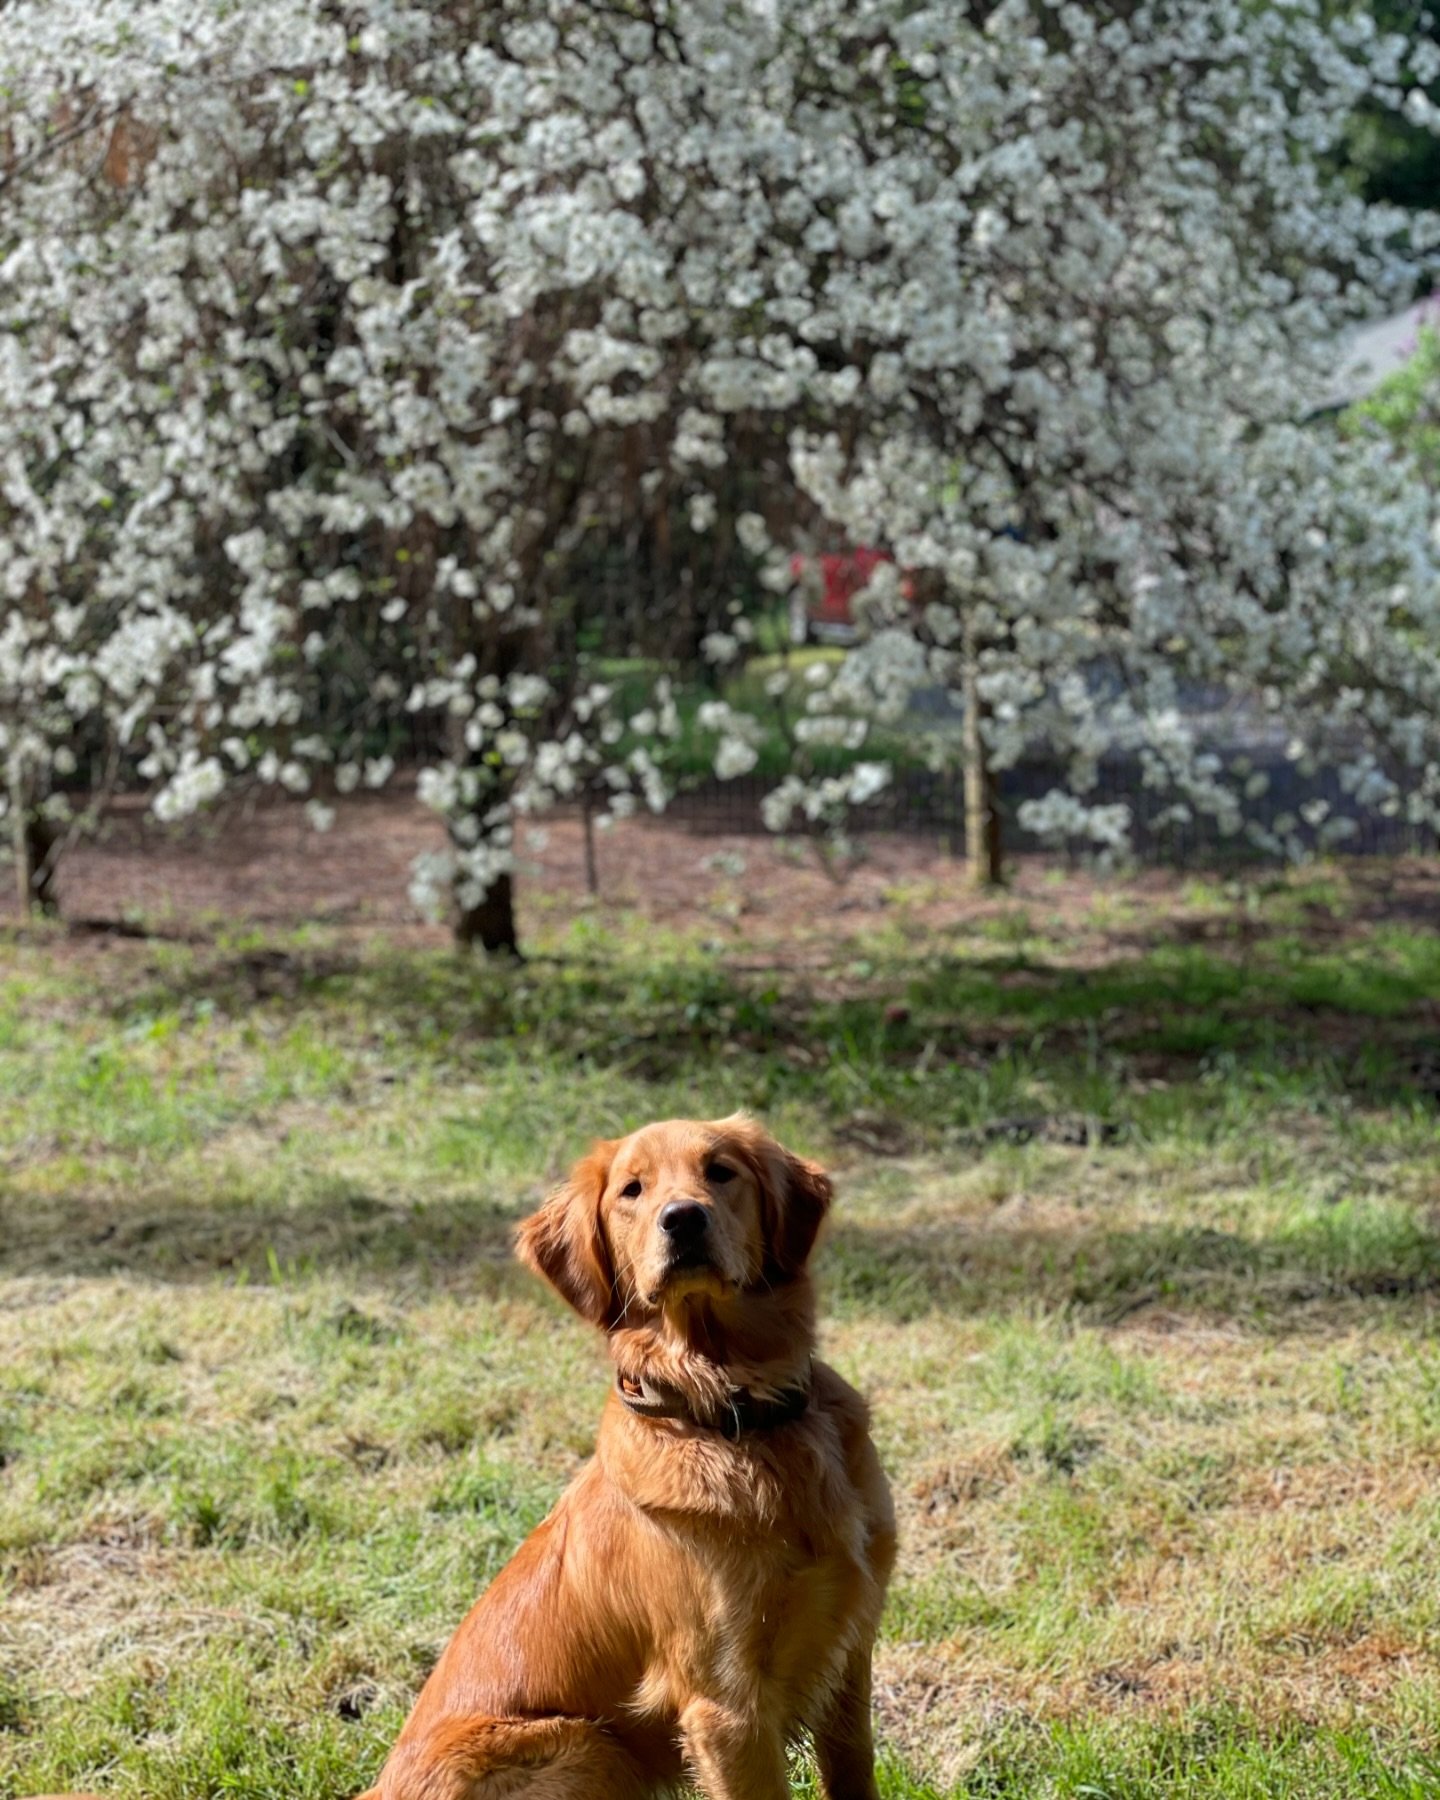 Zoey loves DWR spring time and hanging out by the Dogwood tree😍🐾
🐶Zoey, 1 year old Golden Retriever from Pilot Hill, CA
.
.
.
#goldenretriever #dogboarding #dogdaycare